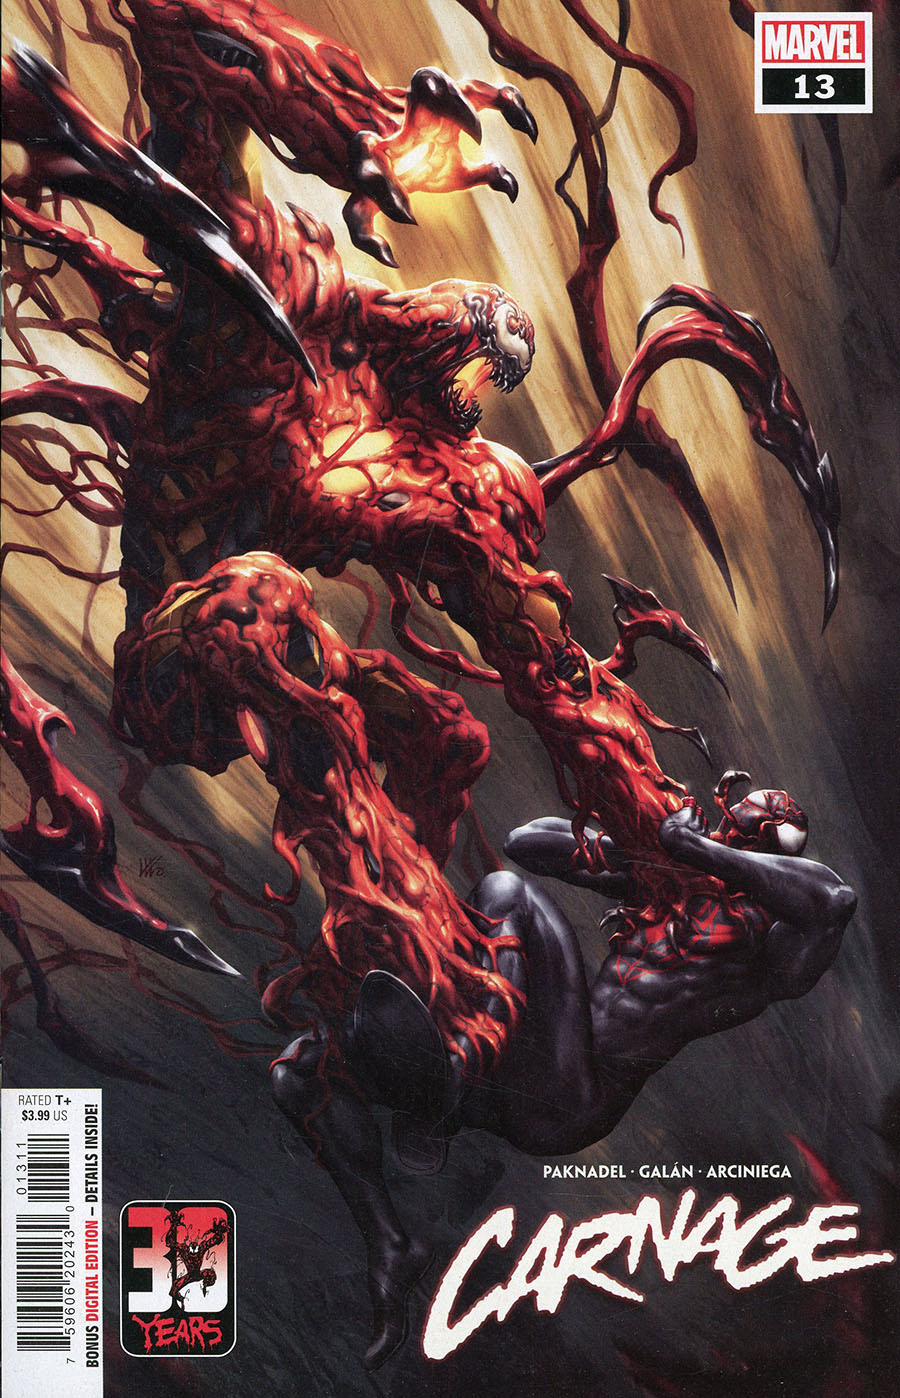 Carnage Vol 3 #13 Cover A Regular Kendrick kunkka Lim Cover (Carnage Reigns Part 3)